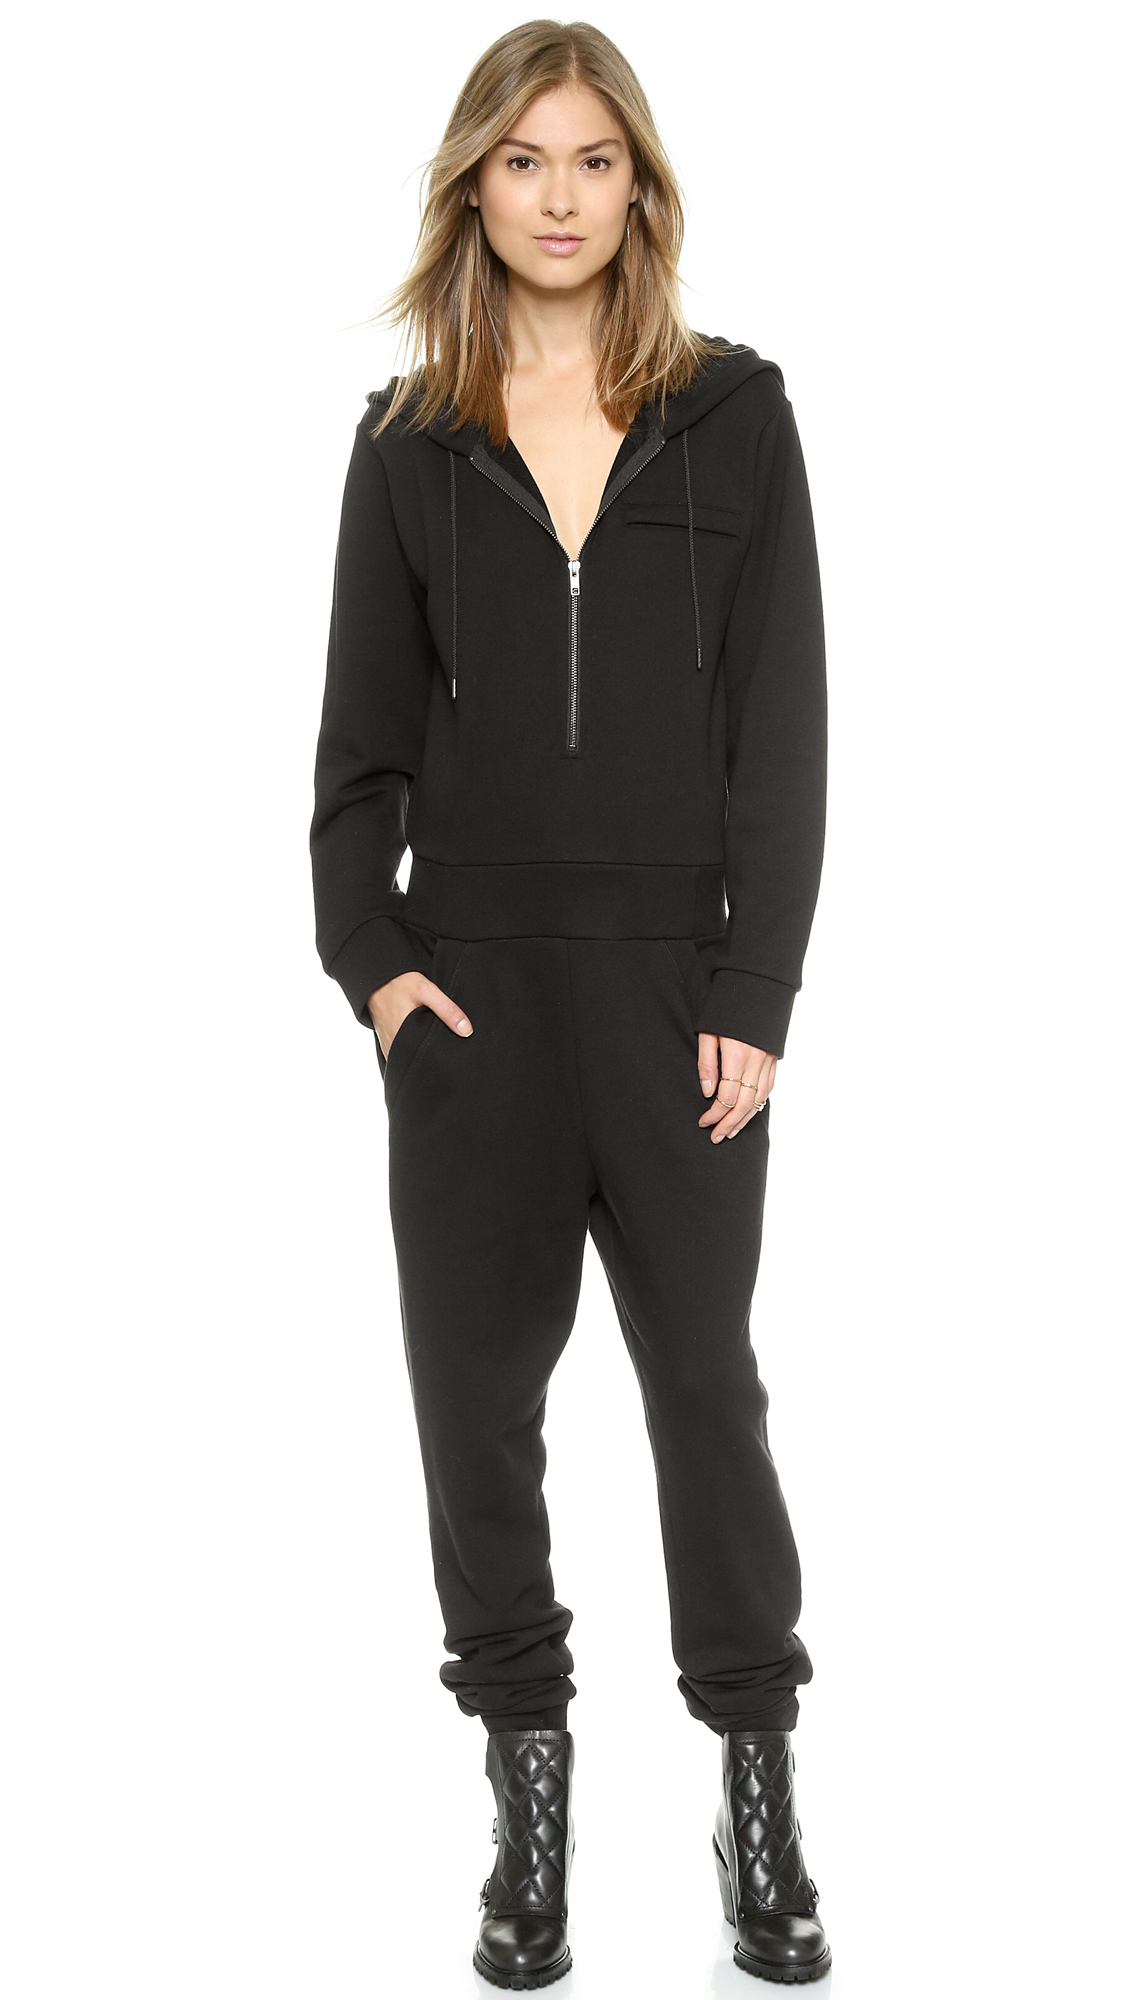 Lyst - Dkny Hooded Jumpsuit With Logo - Black/White in Black